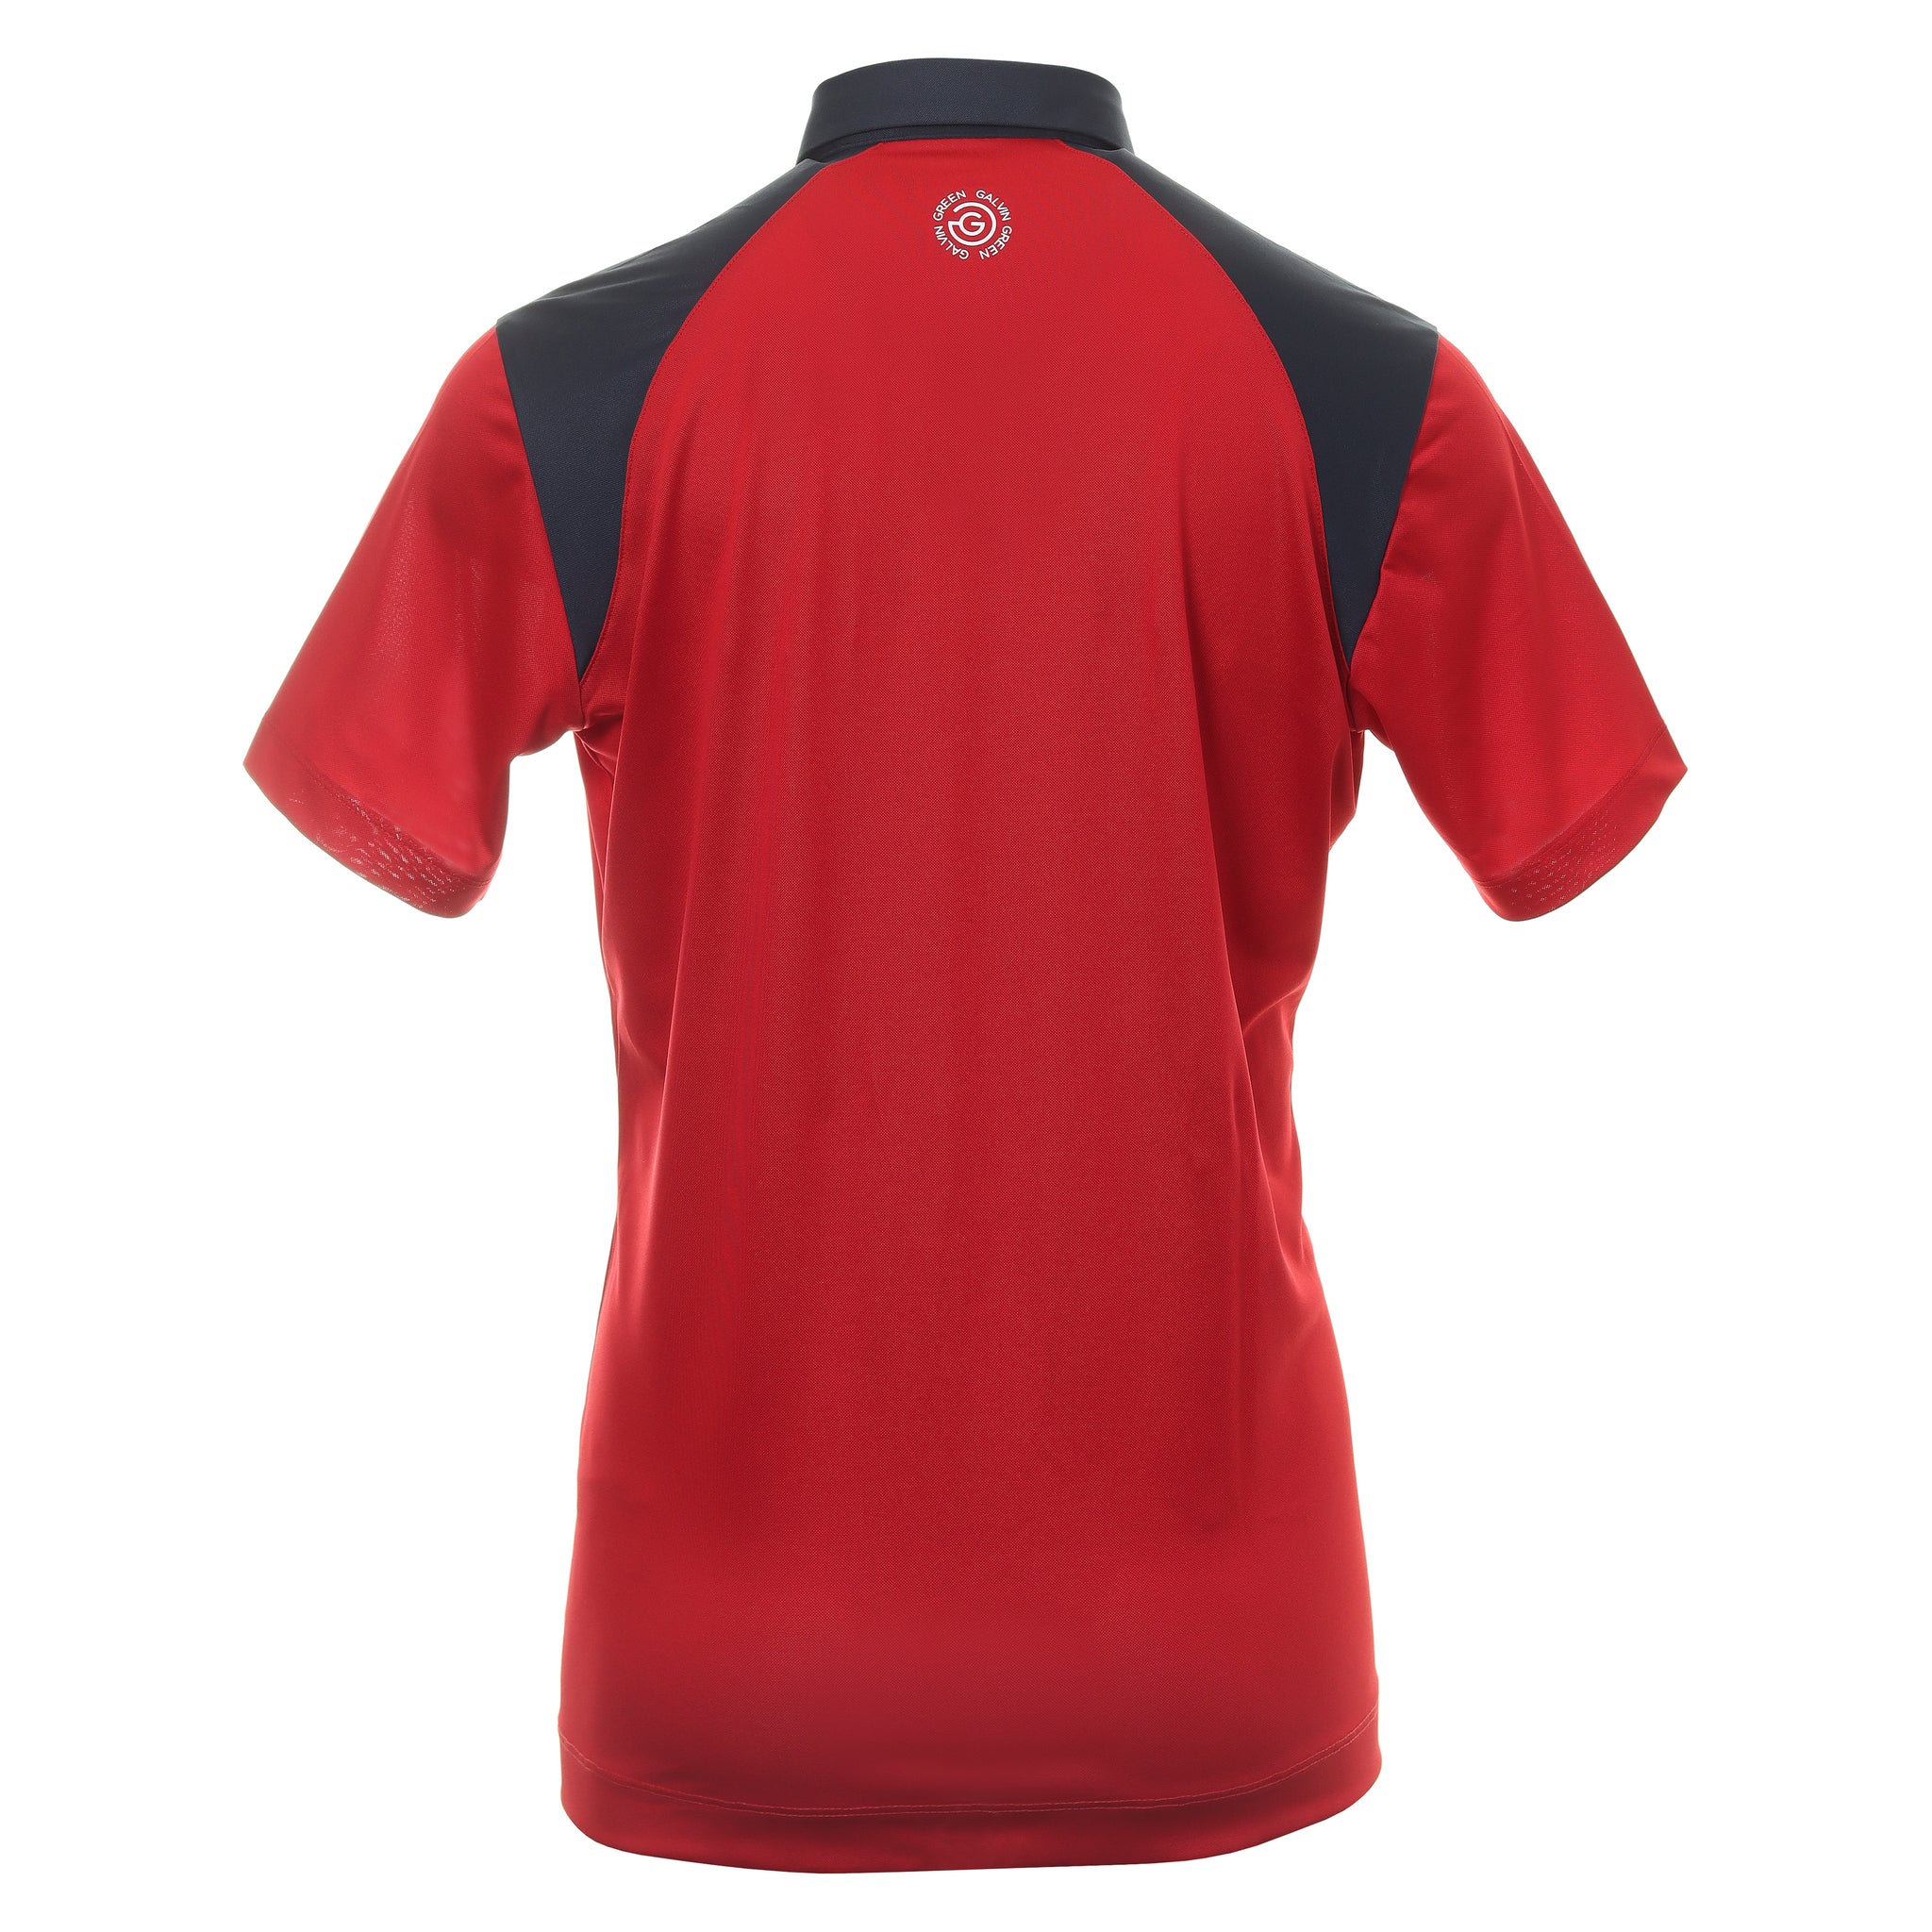 Galvin Green Mapping Ventil8+ Golf Shirt G1364 Red Navy White 23 ...